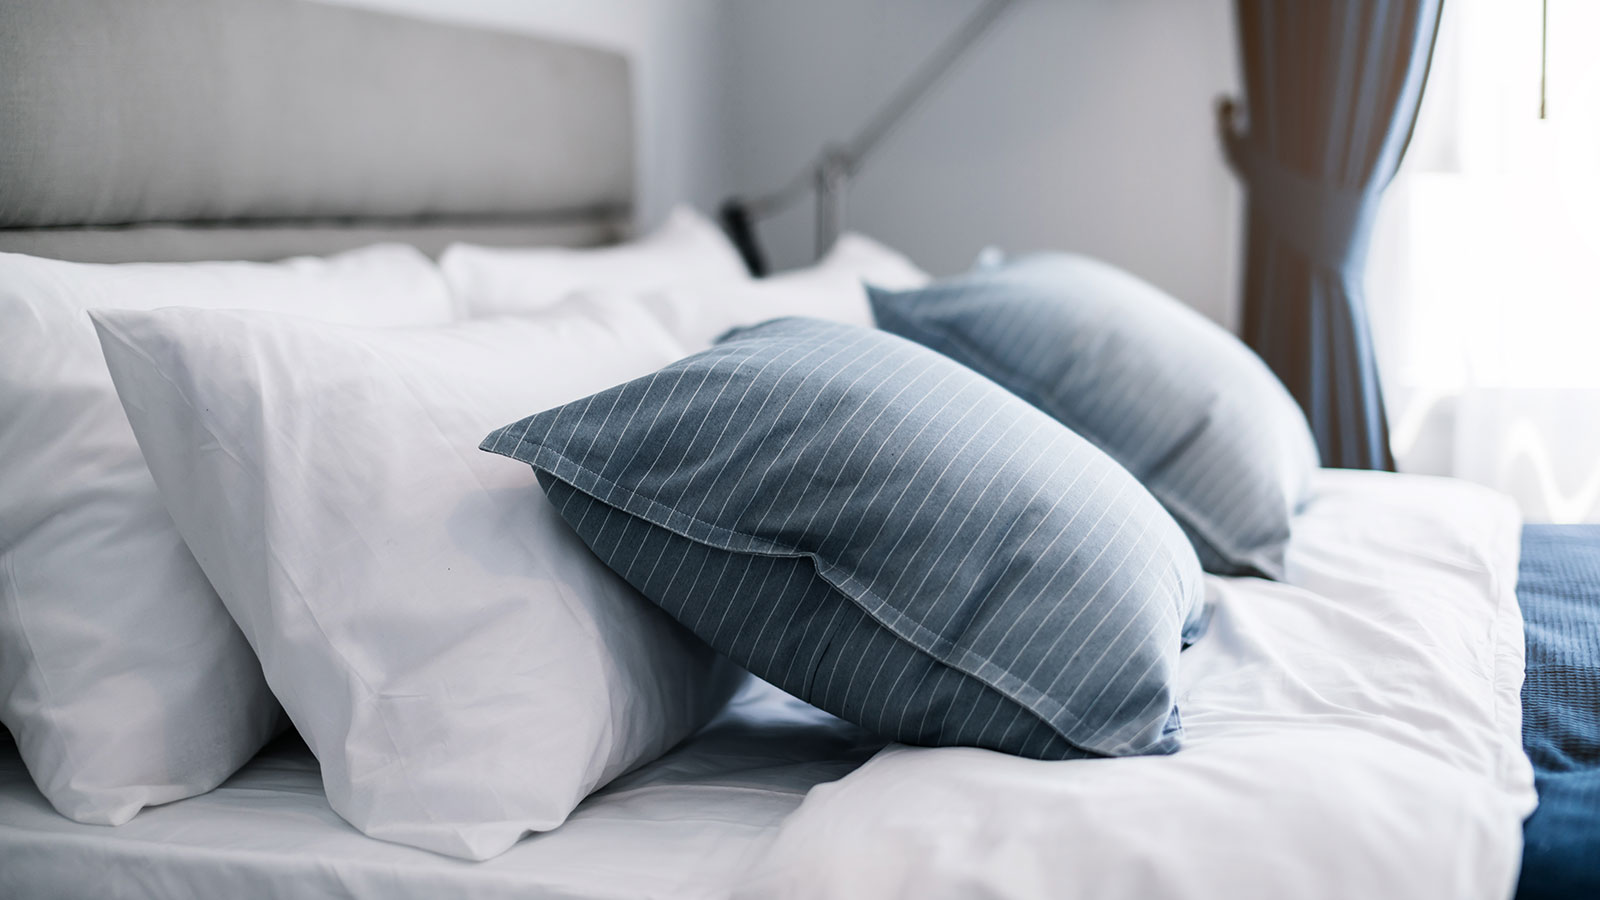 Sleeping with Pillow Between Your Legs: Benefits, How to Do It